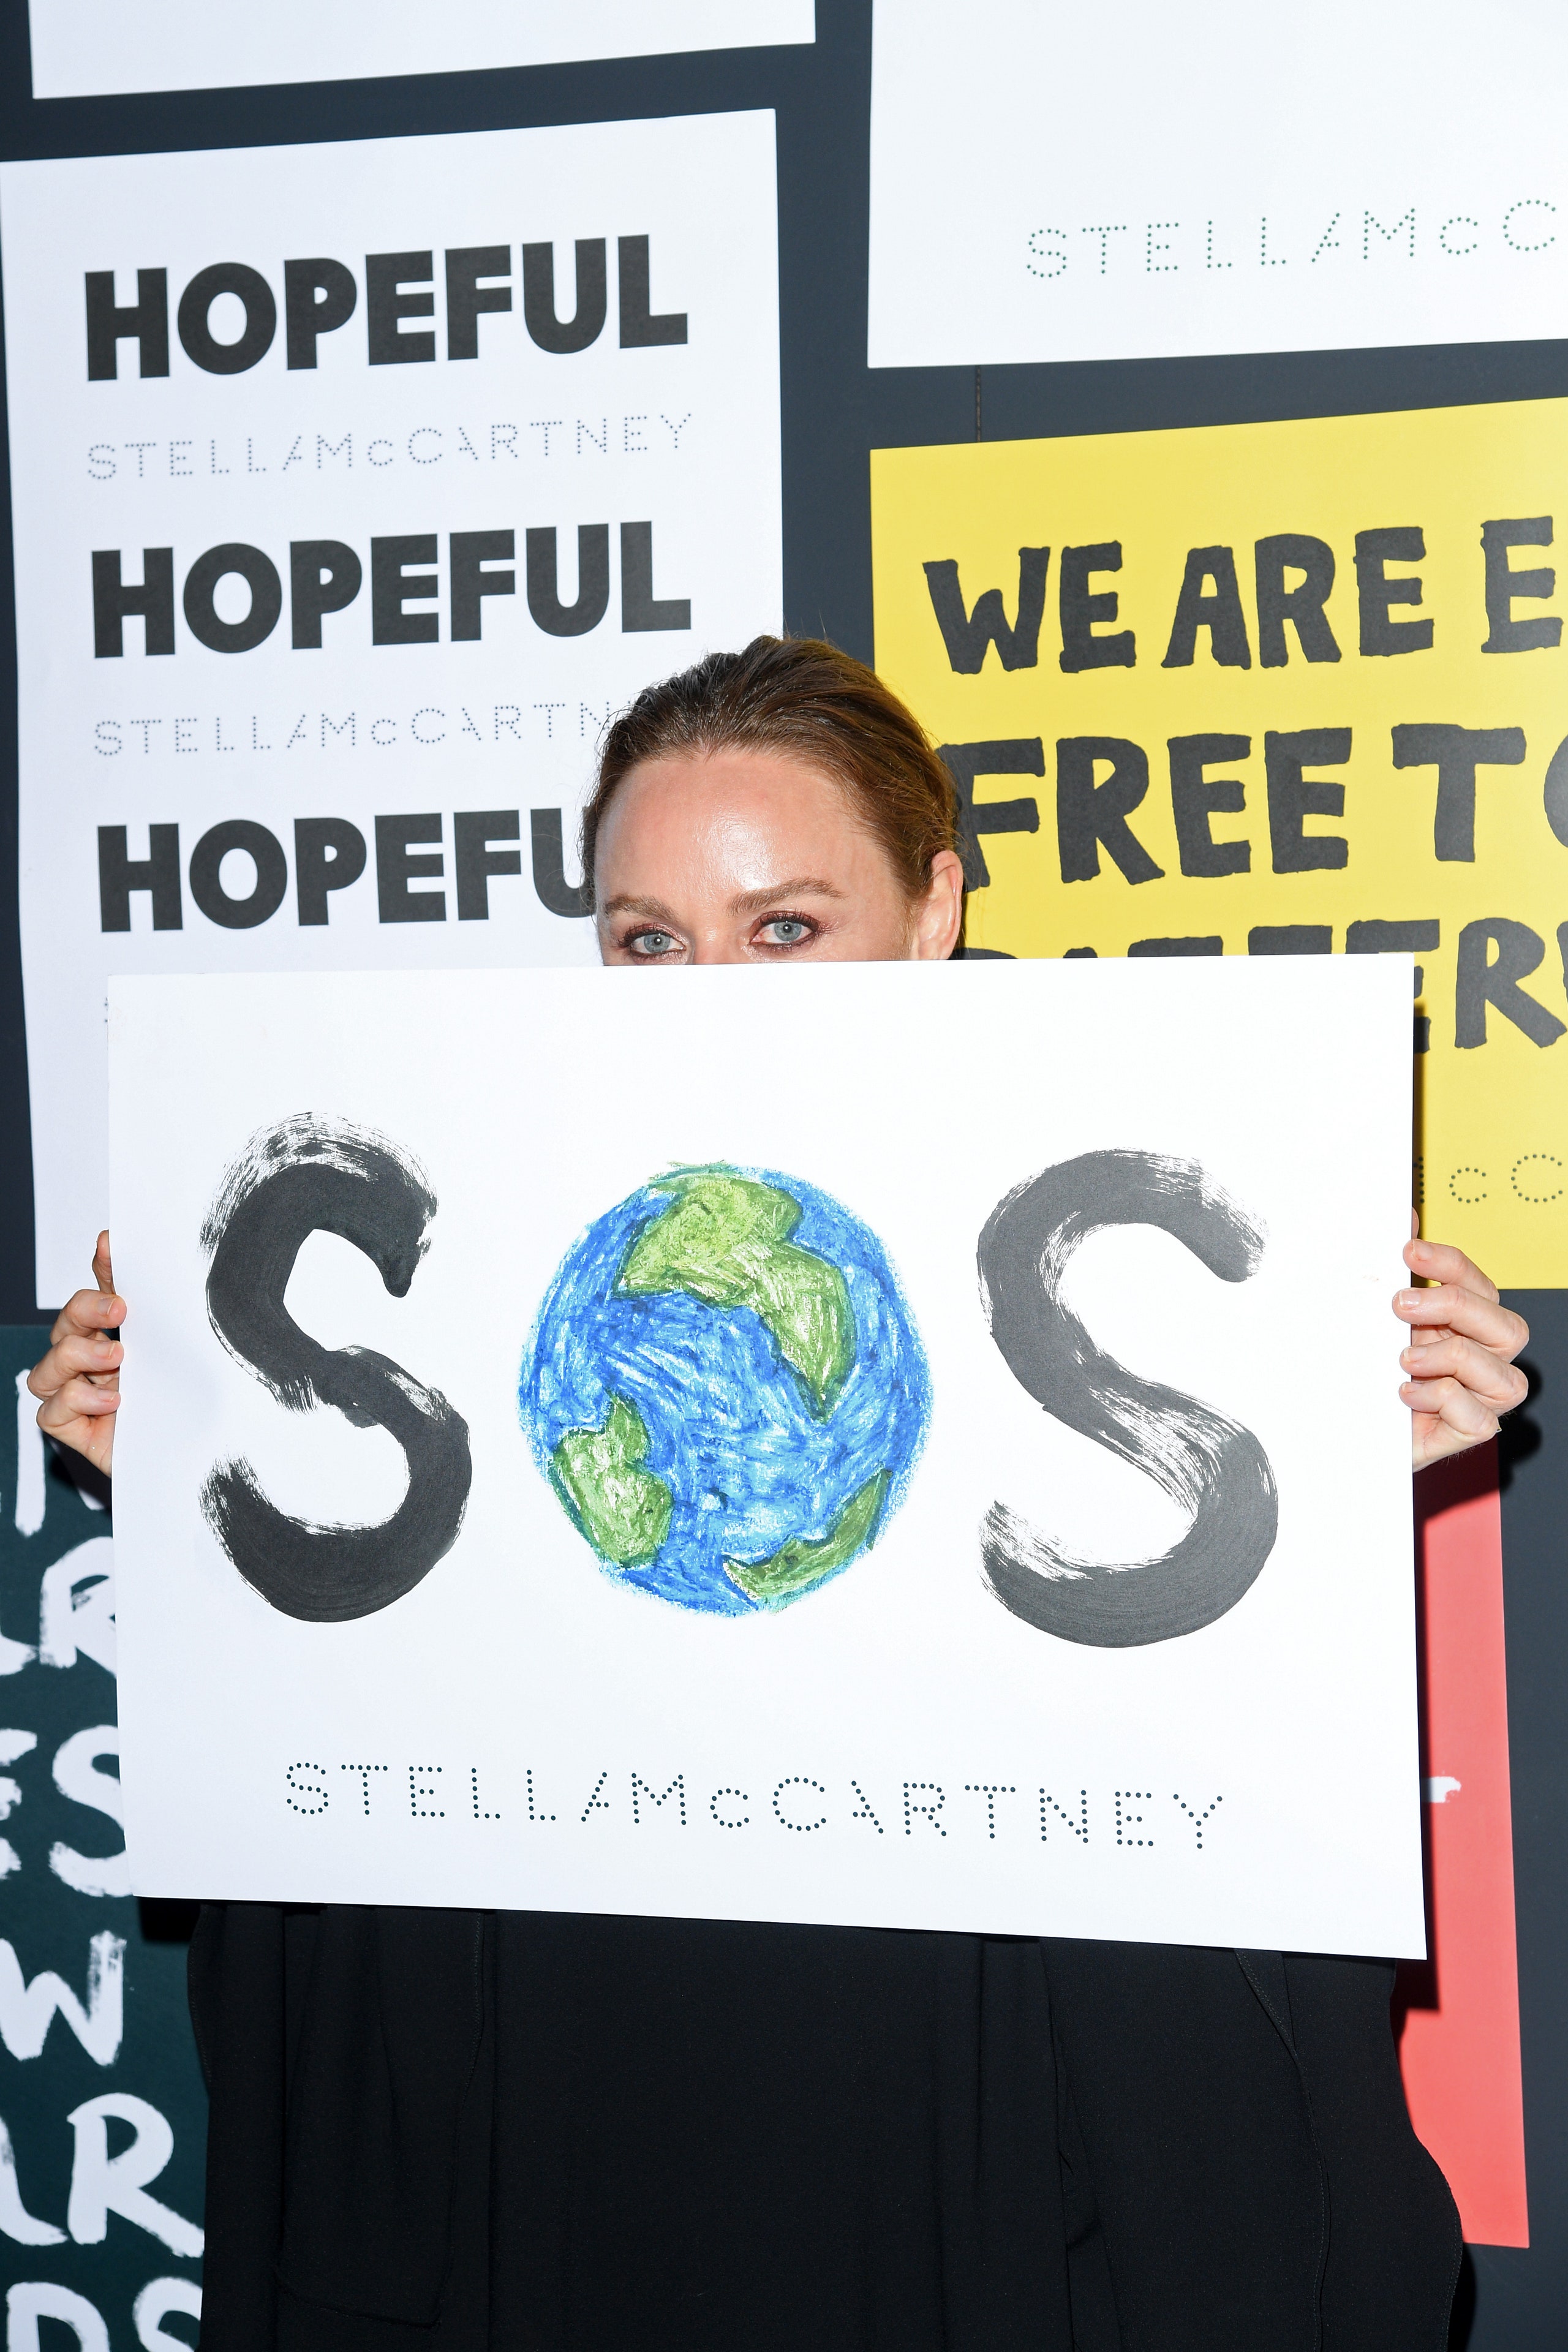 MILAN ITALY  JUNE 14 Stella McCartney poses with a sign readin 'SOS' during the presentation of Stella McCartney during...